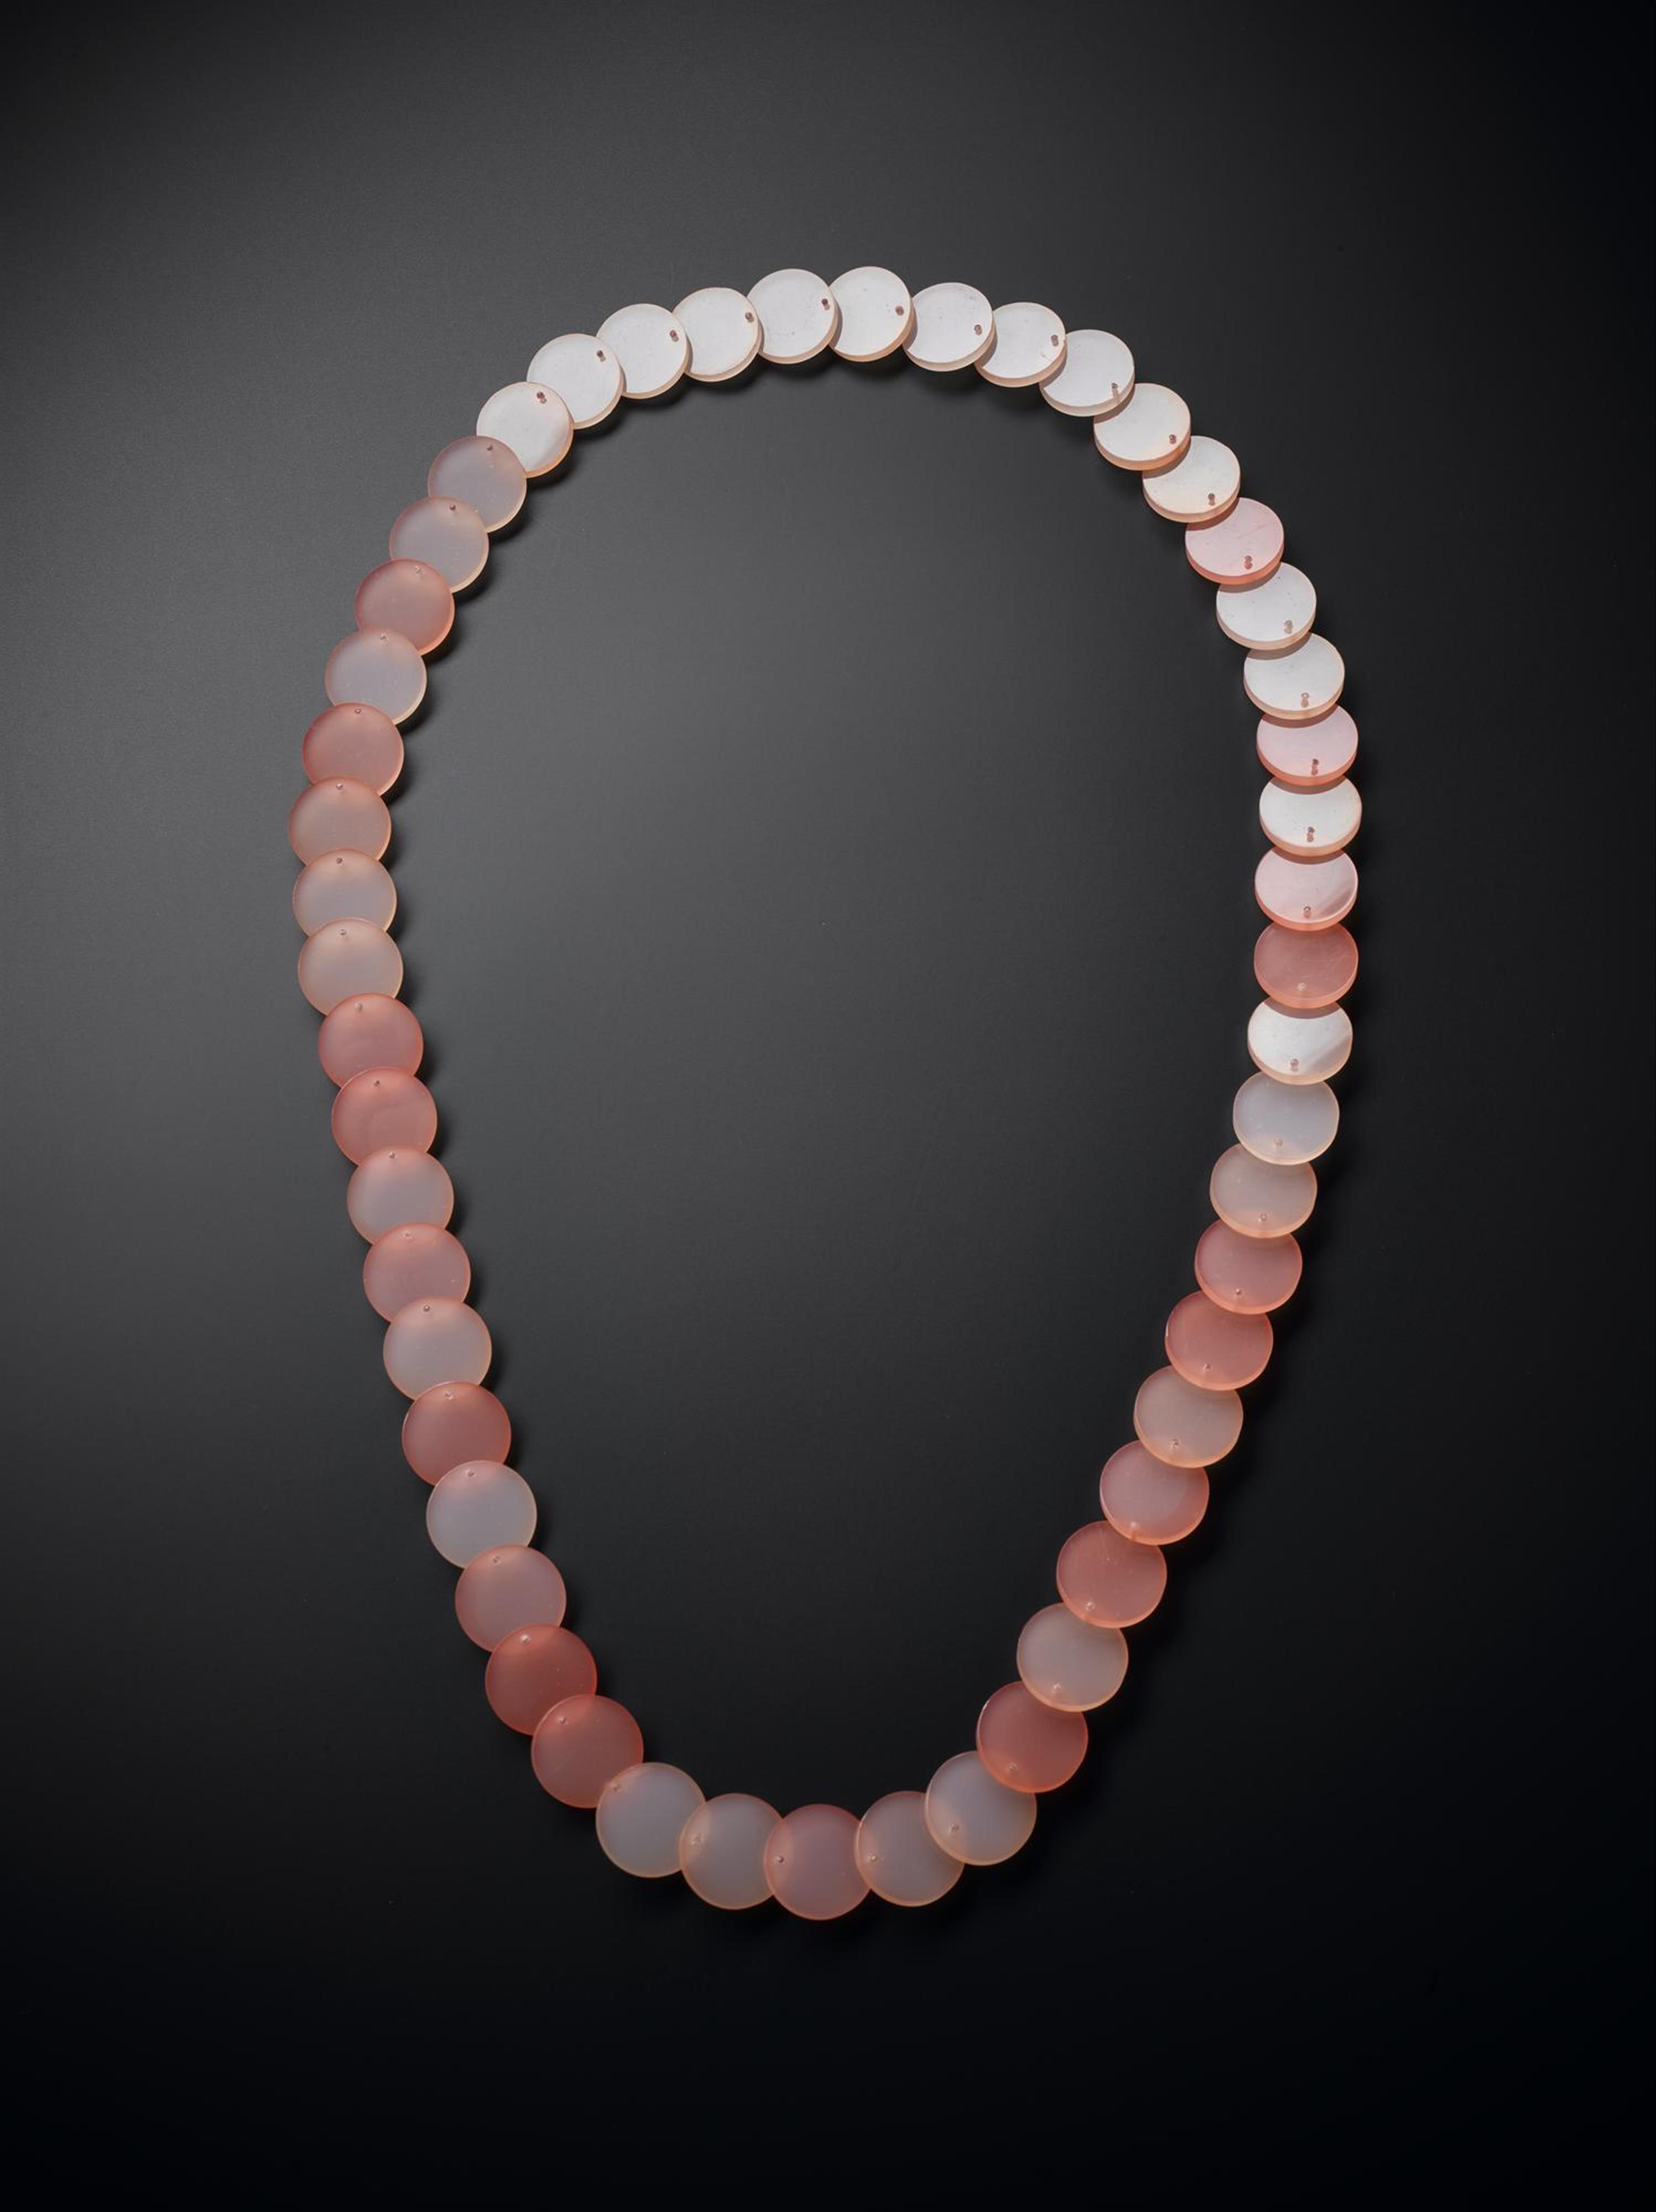 Necklace, comprised of 51 overlapping opaque acrylic disc beads: British, designed for Jean Muir Ltd by C & N Buttons & Jewellery Production, 1966-95.